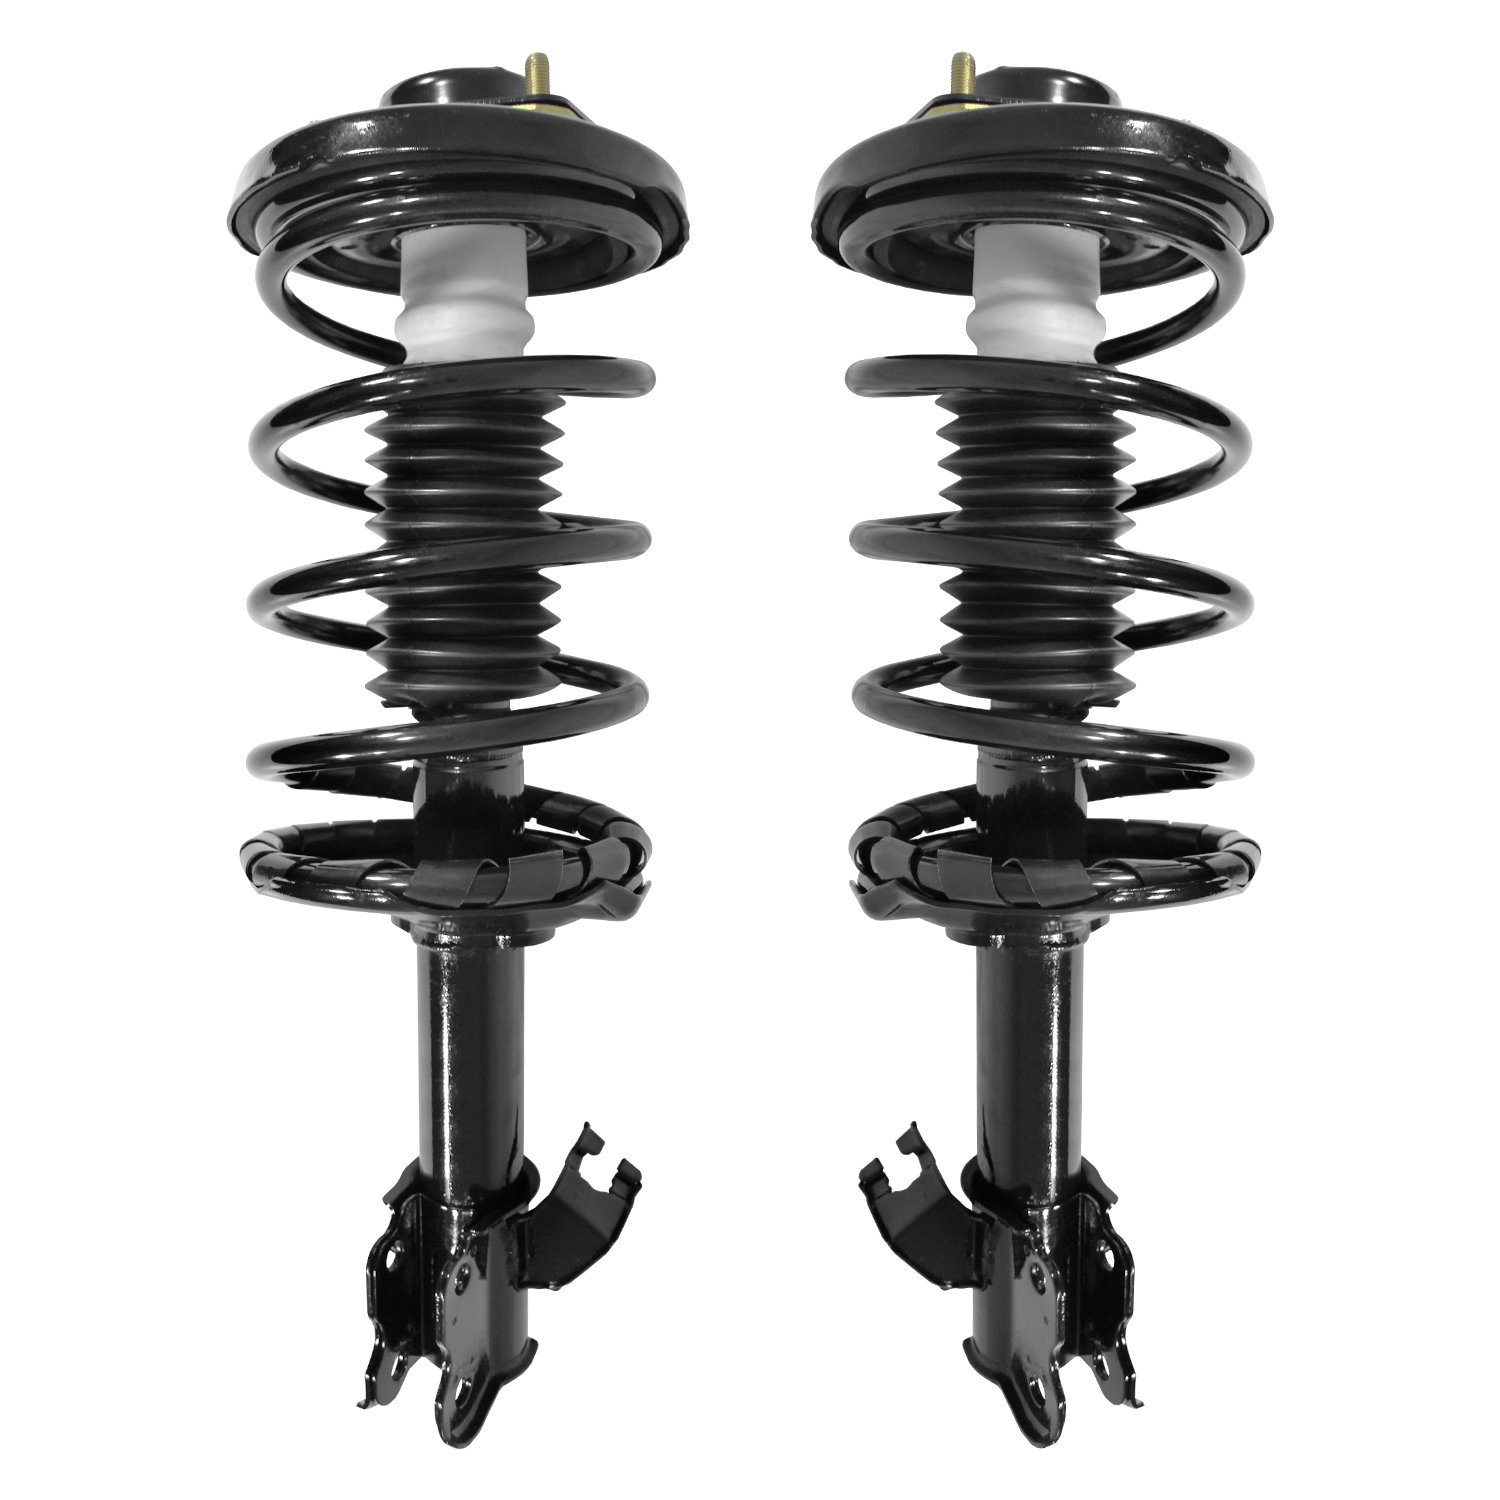 2-11431-11432-001 Suspension Strut & Coil Spring Assembly Set Fits Select Nissan Maxima, Infiniti I30